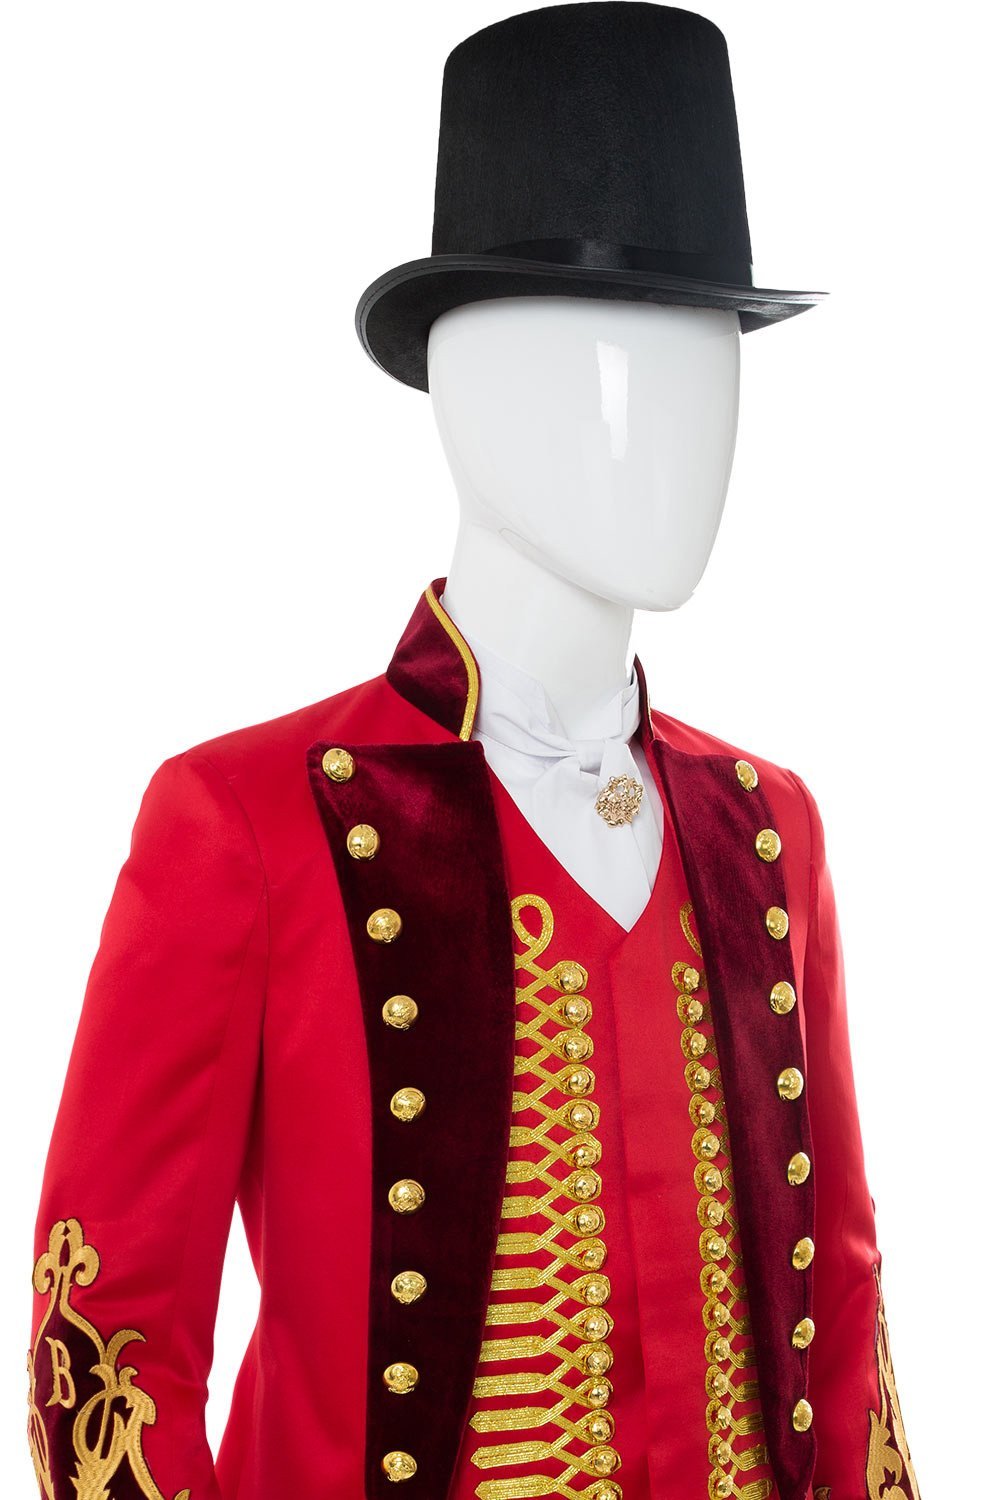 The Greatest Showman  P.T. Barnum Cosplay costume Red Suit